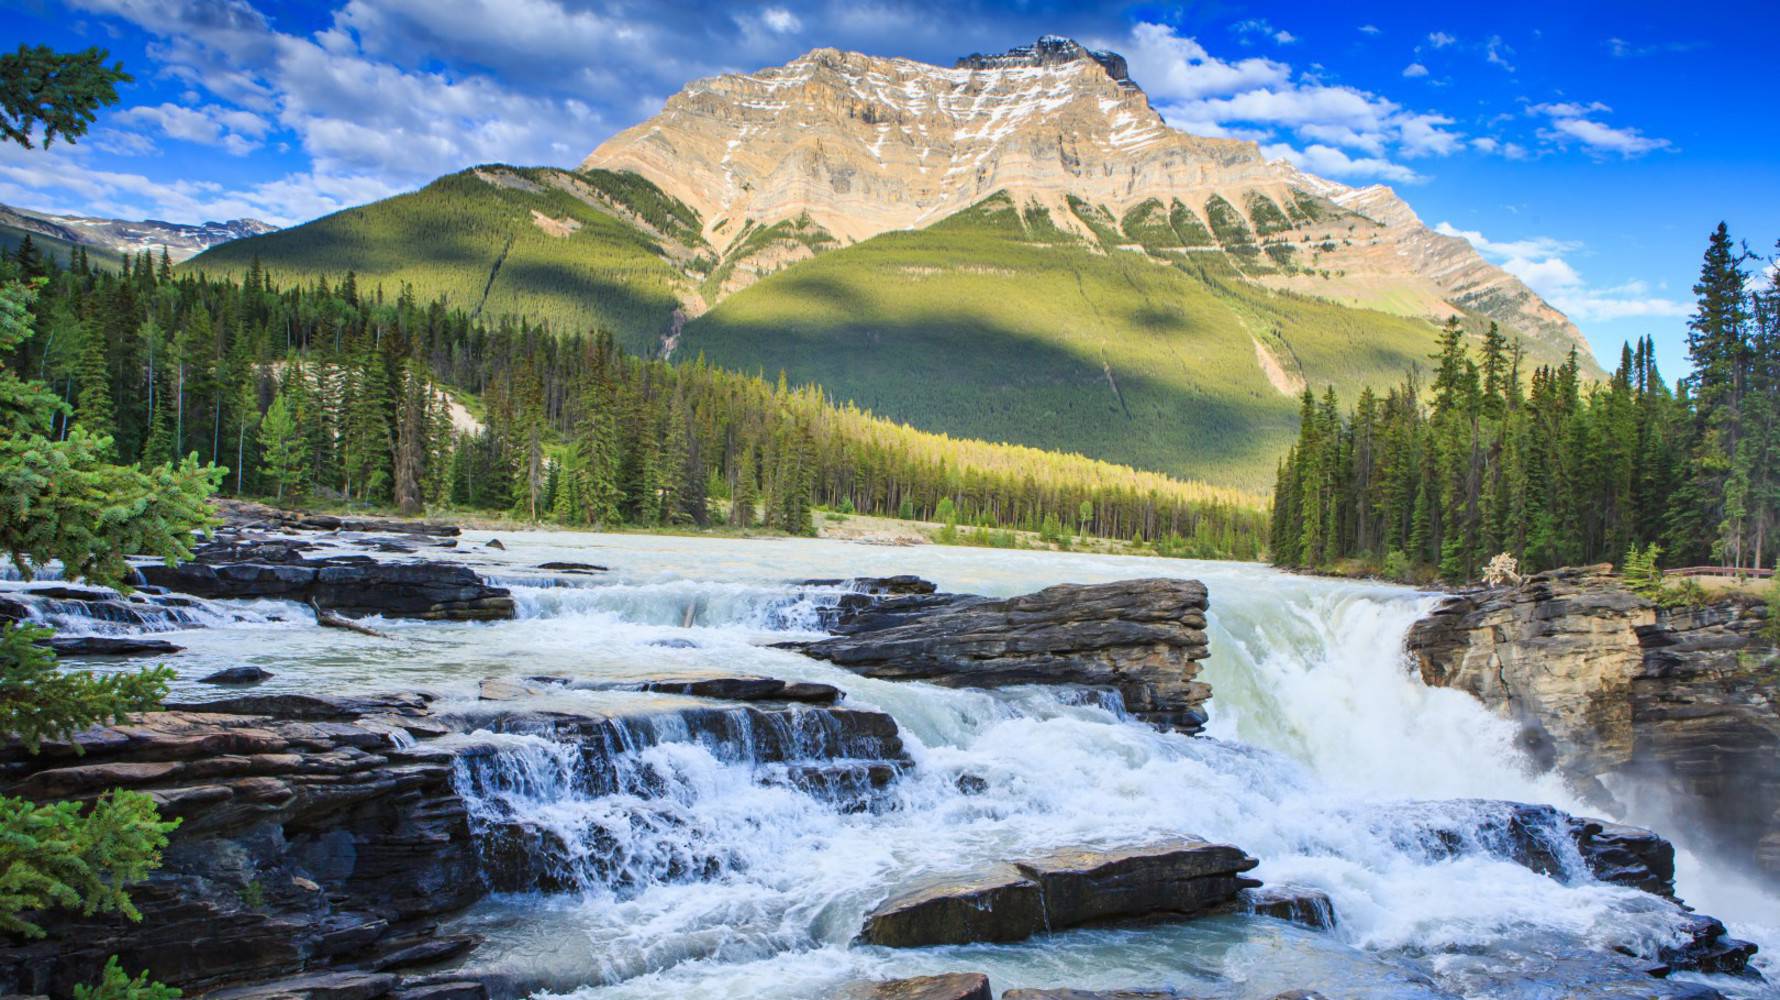 Athabasca_Falls_-_shutterstock_204231172_(Large)